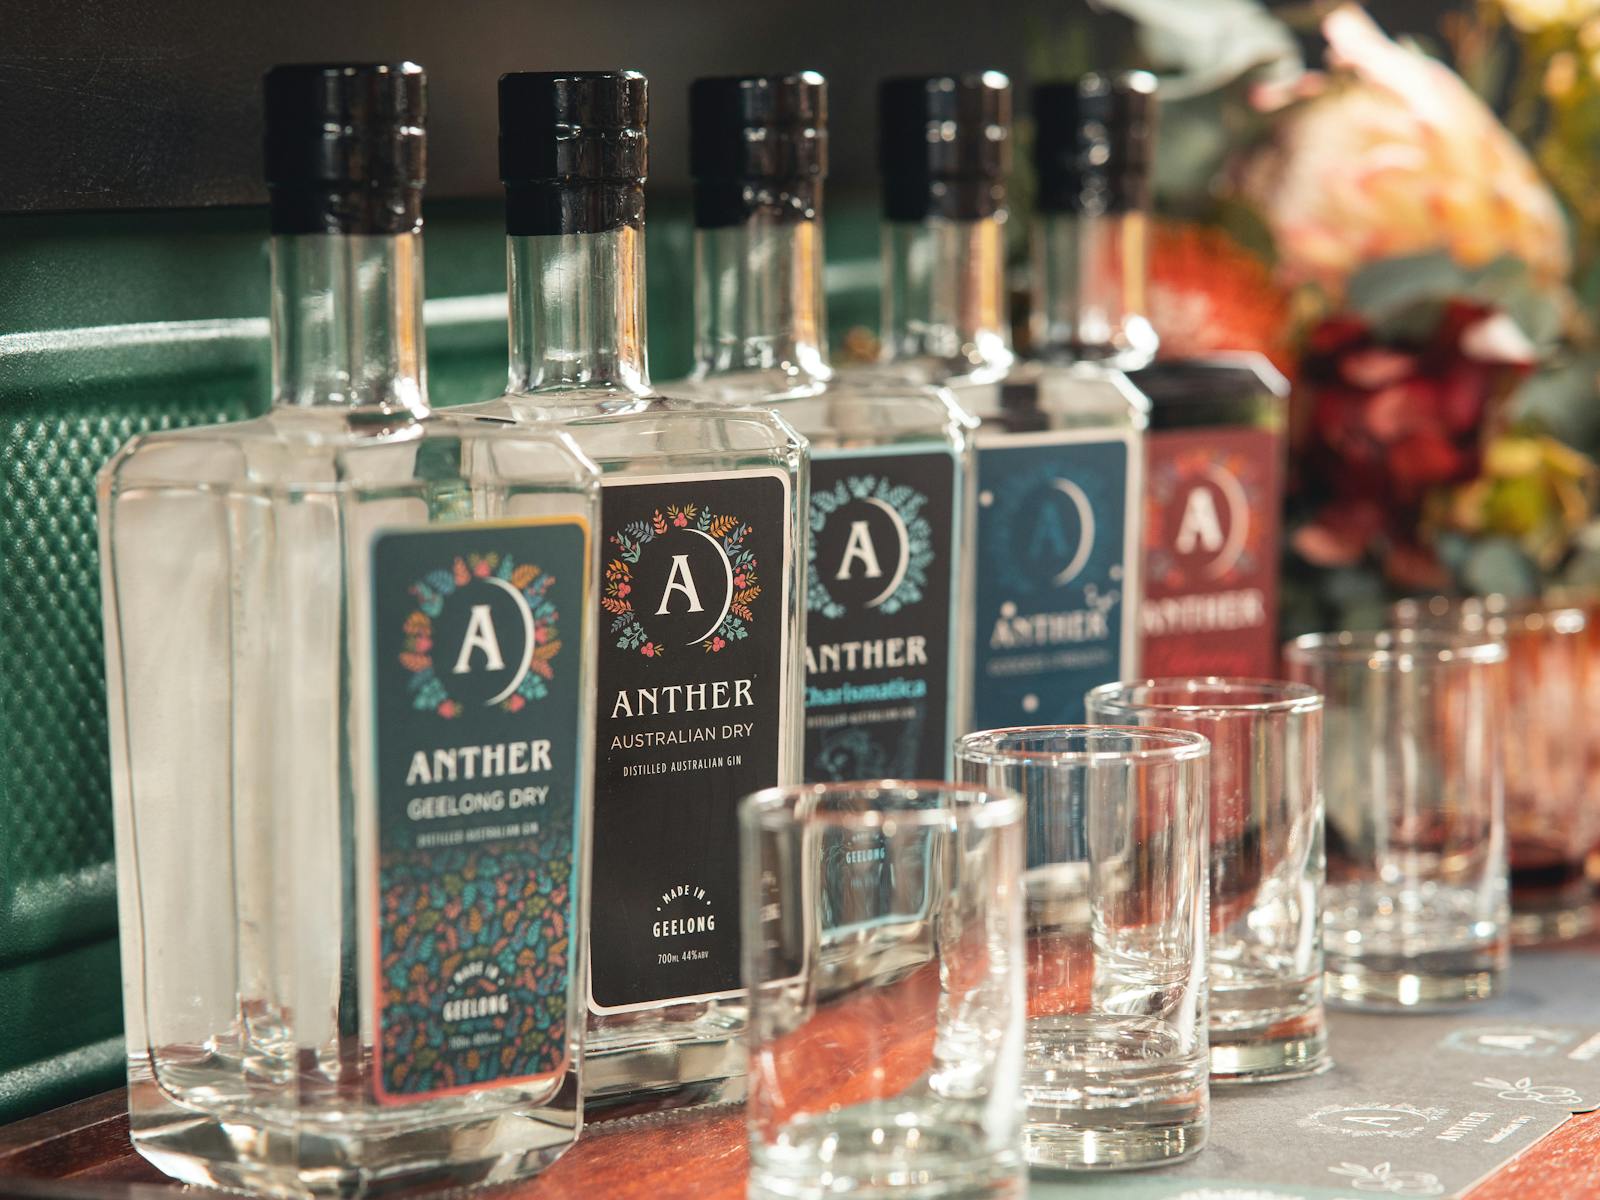 Anther Gin tasting flight includes five gins, tonic, botanicals and garnishes.